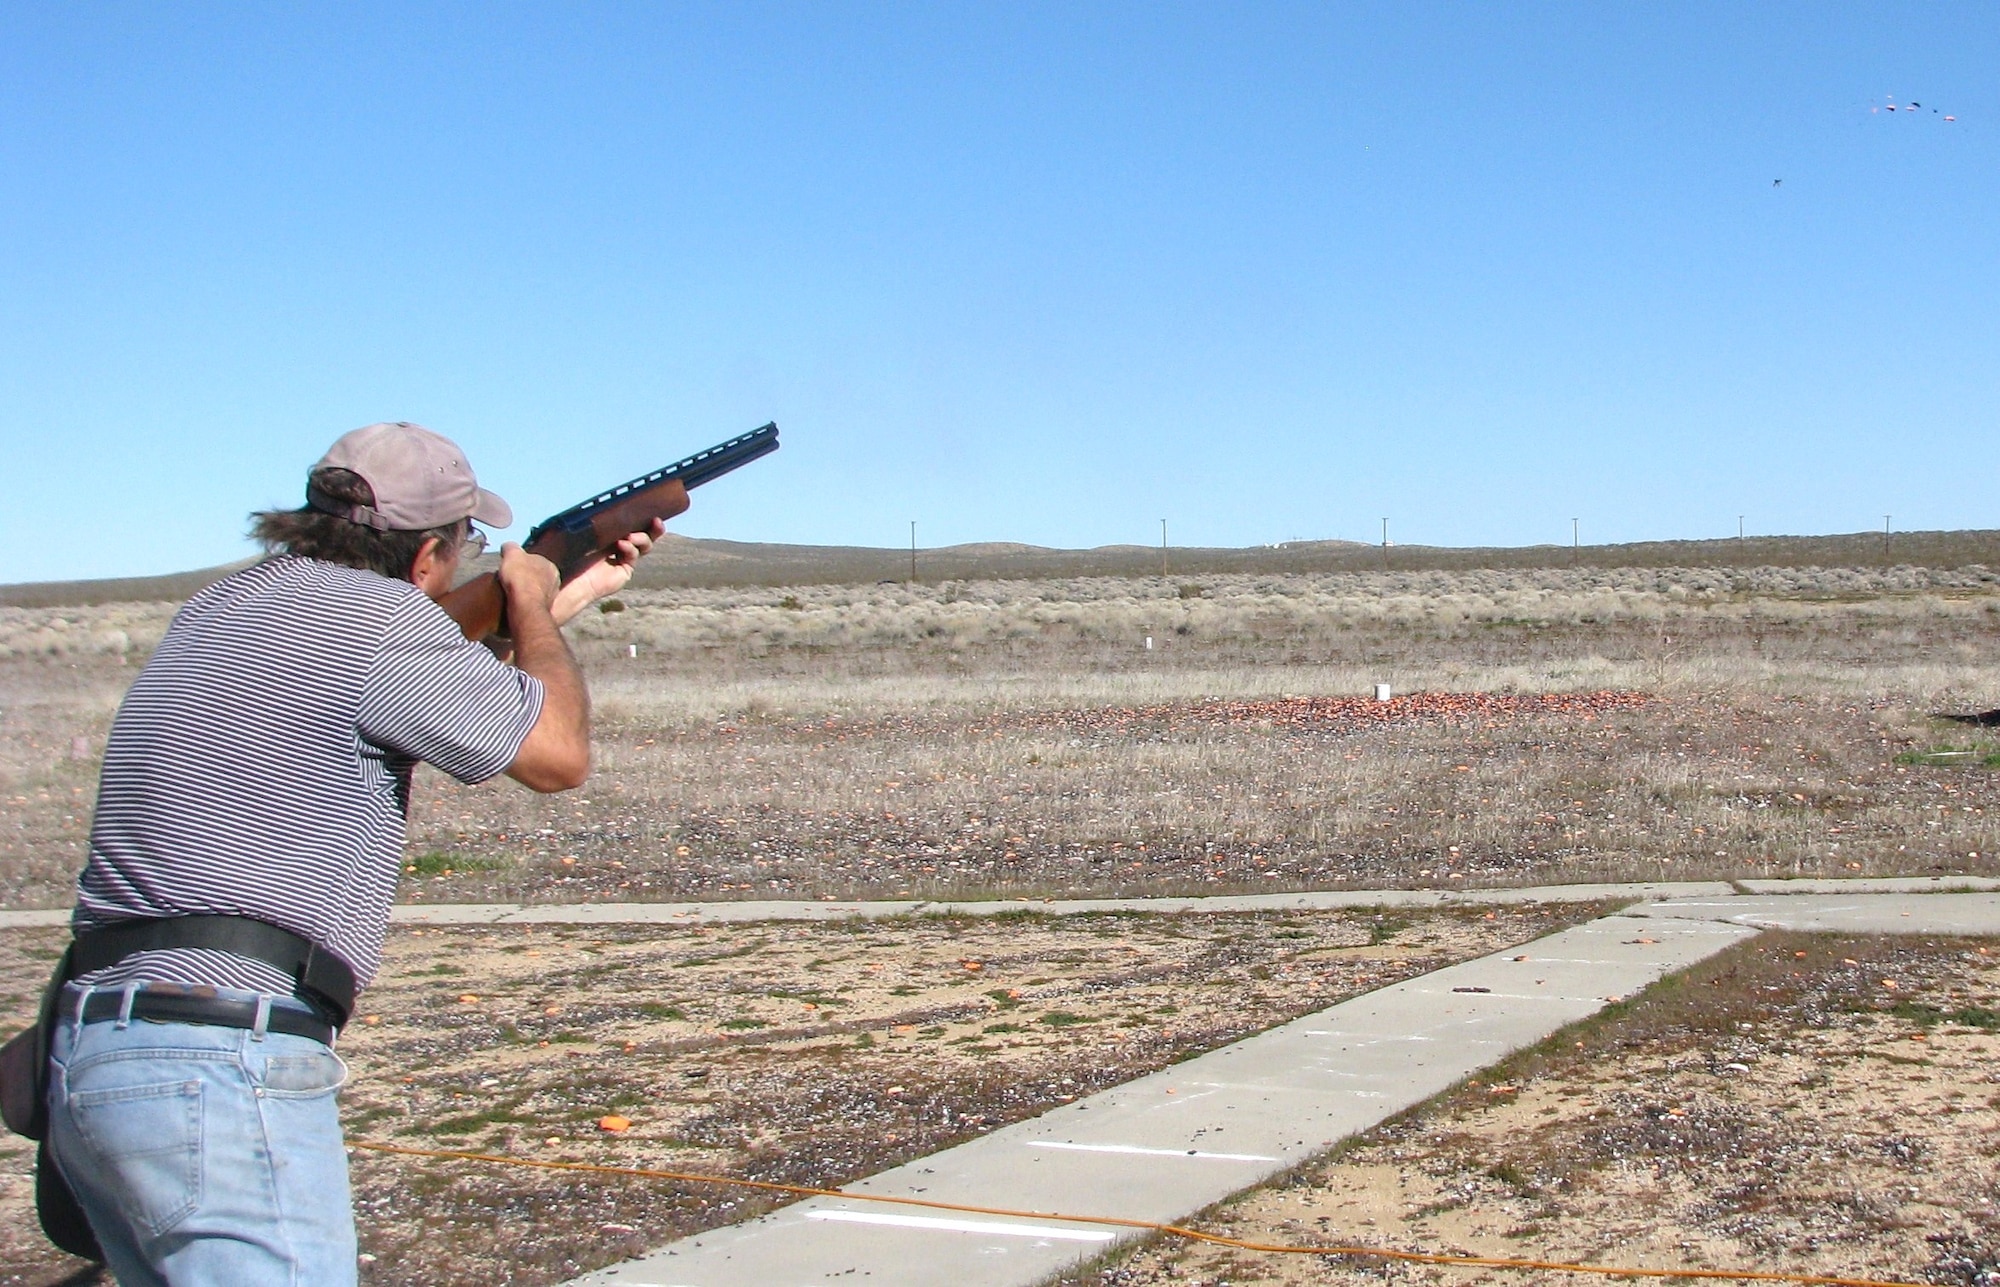 Shooters of all ages fire away at Edwards Rod and Gun Club > Edwards Air  Force Base > News